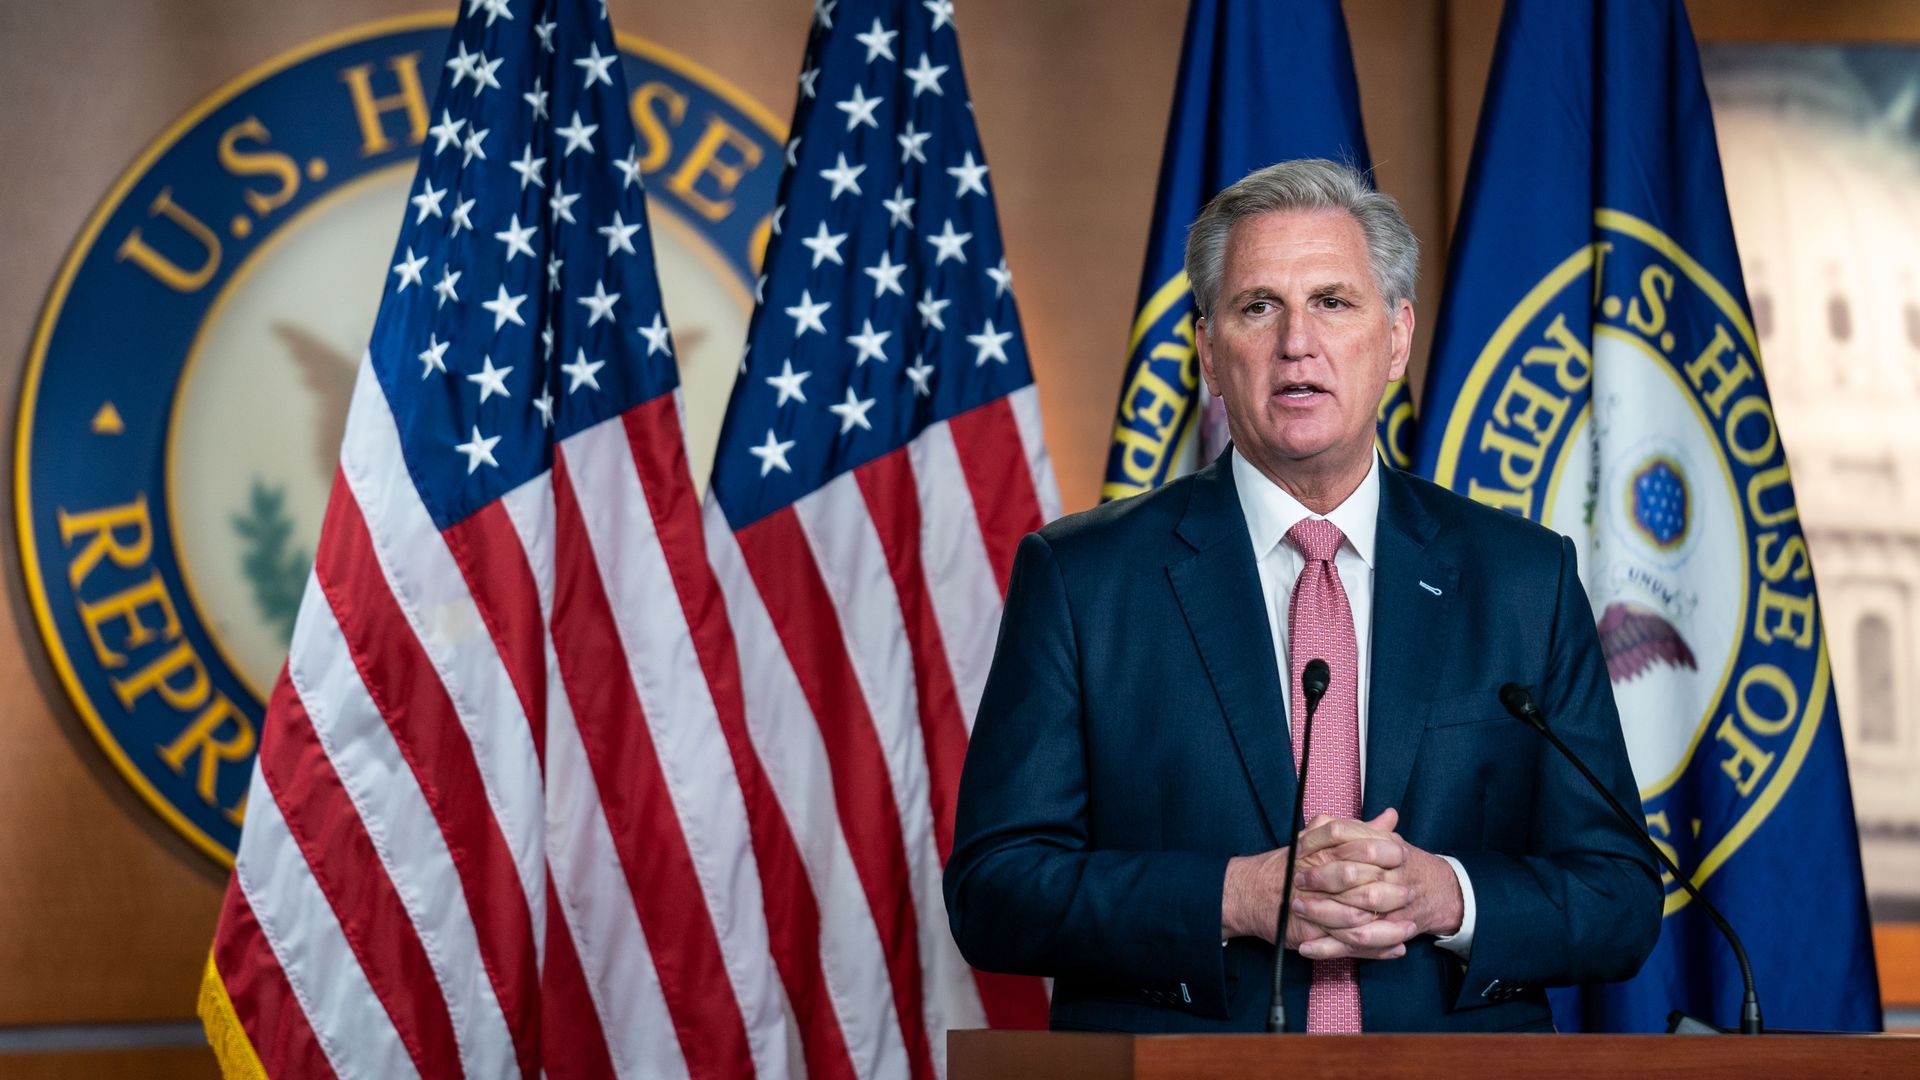 House Minority Leader Kevin McCarthy is seen speaking during his weekly news conference.